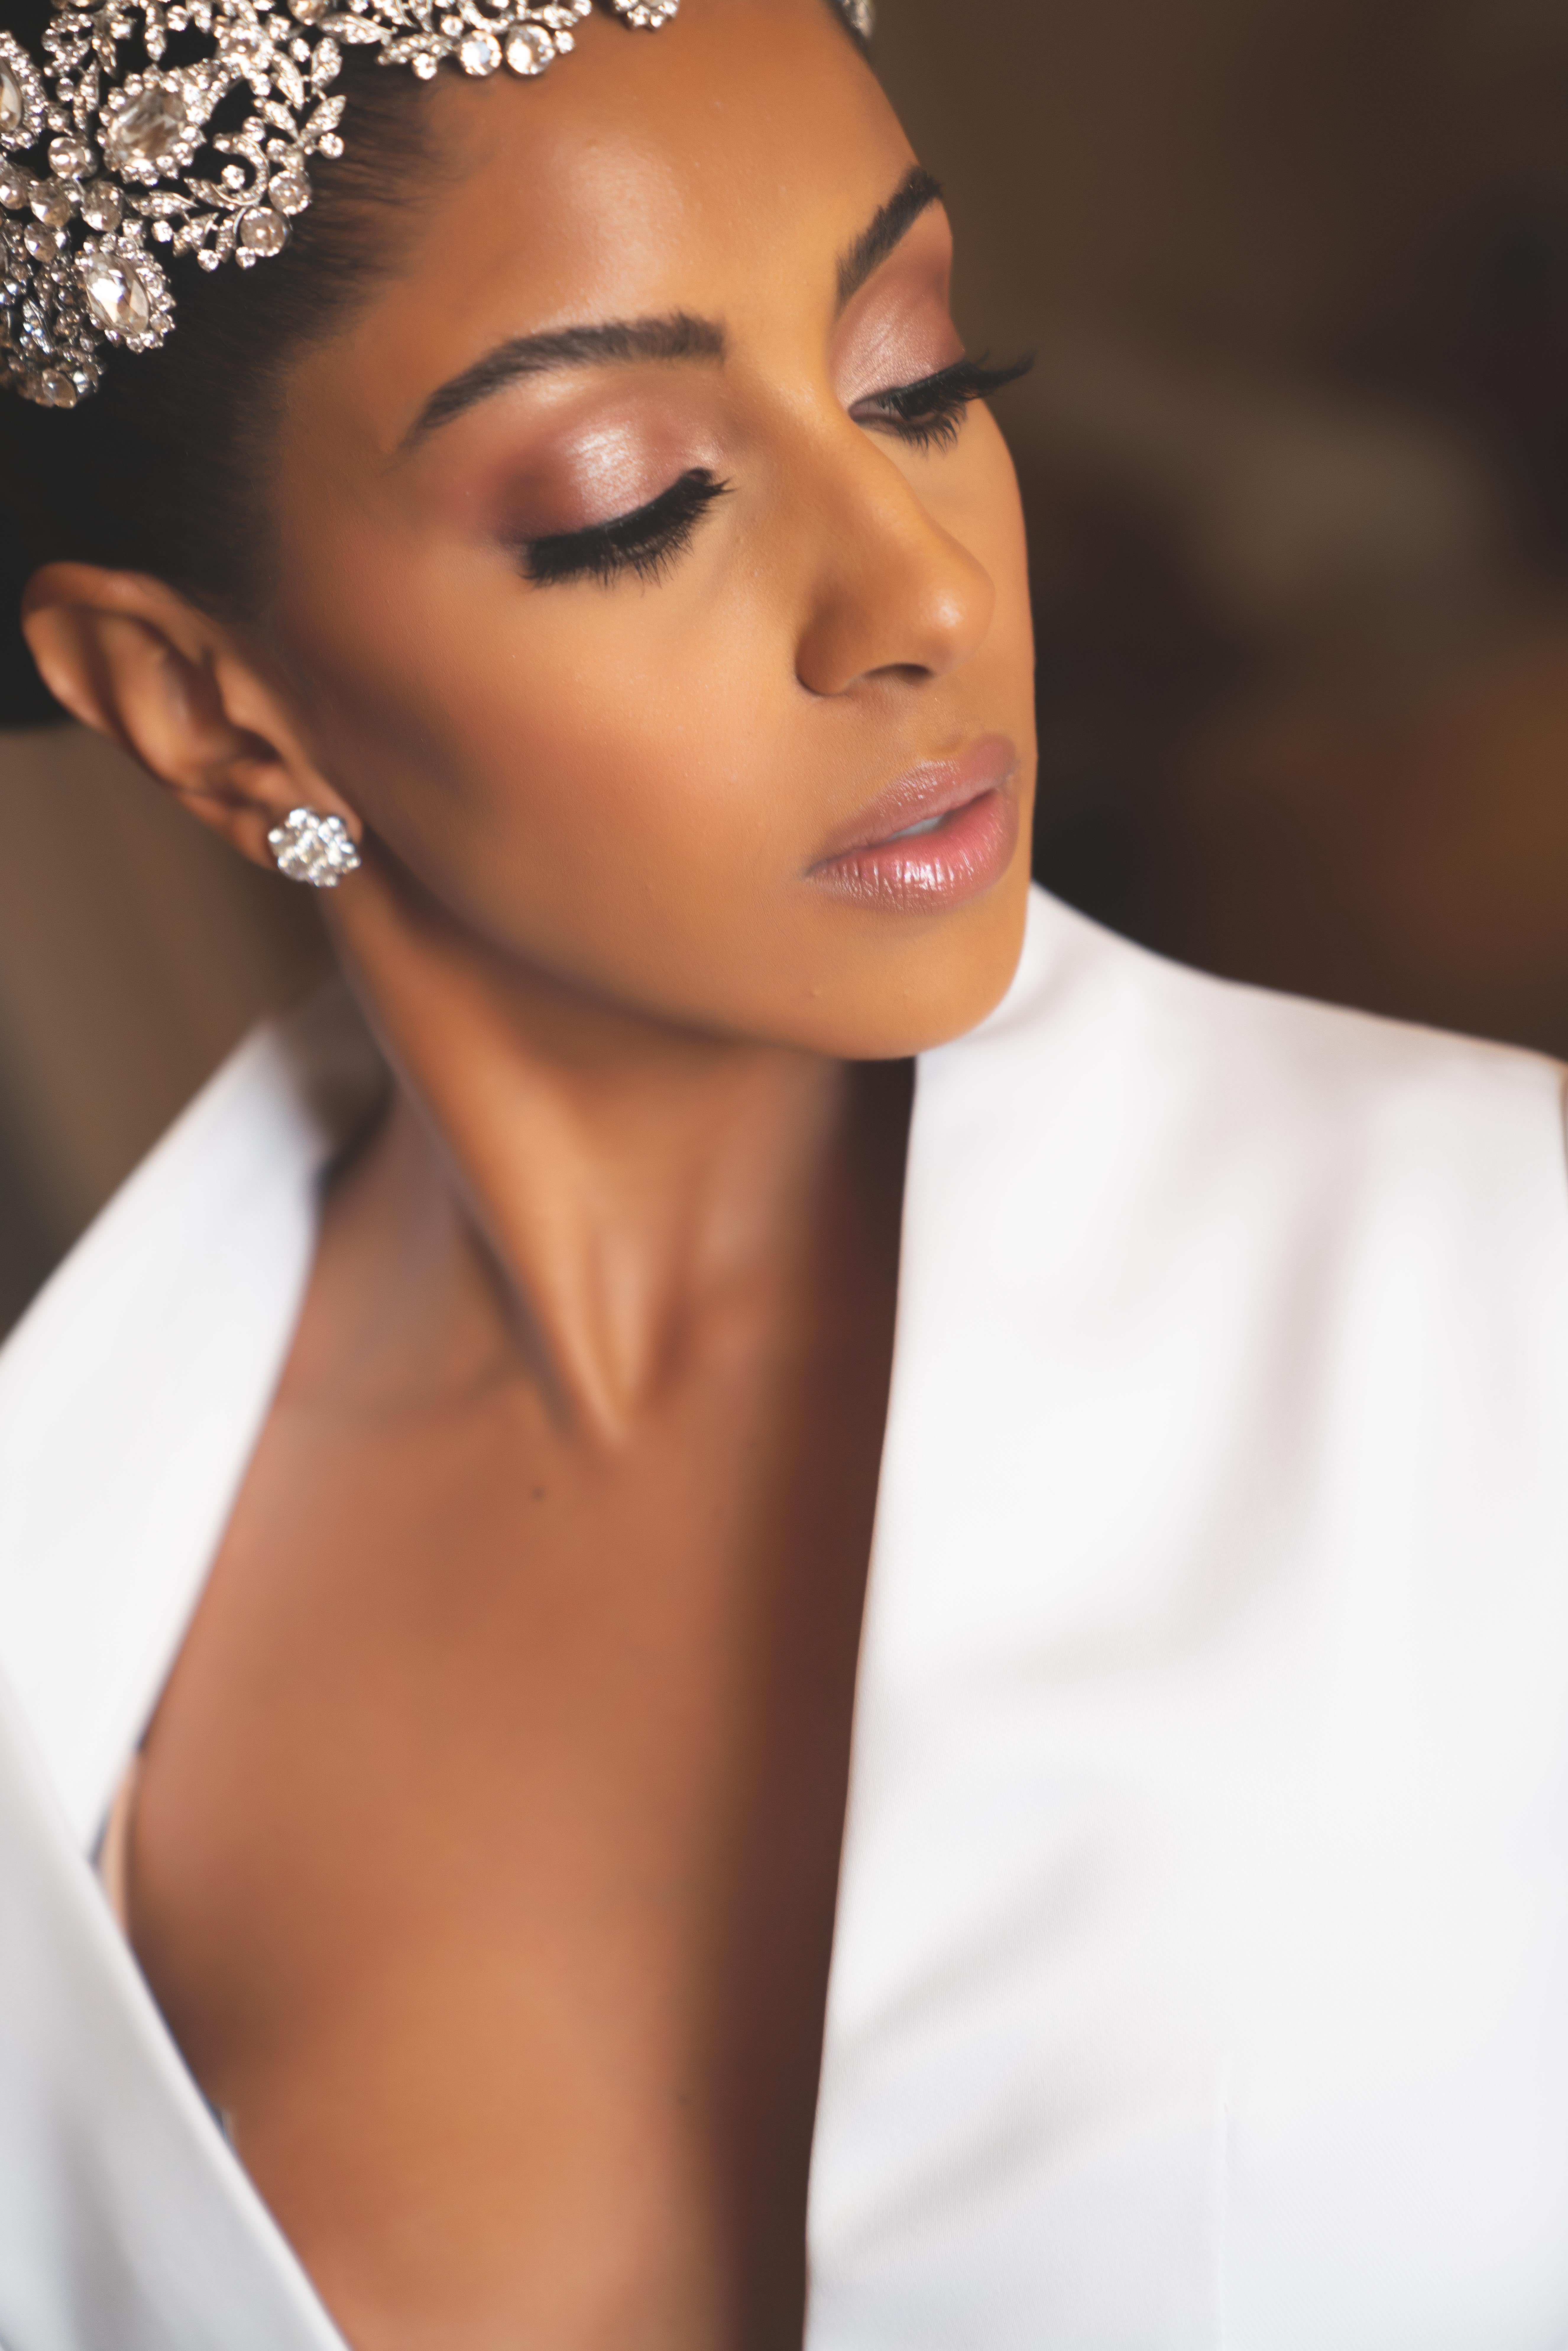 Bridal Bliss Exclusive: Mike and Kyra Epps Share Stunning Photos From Their California Wedding